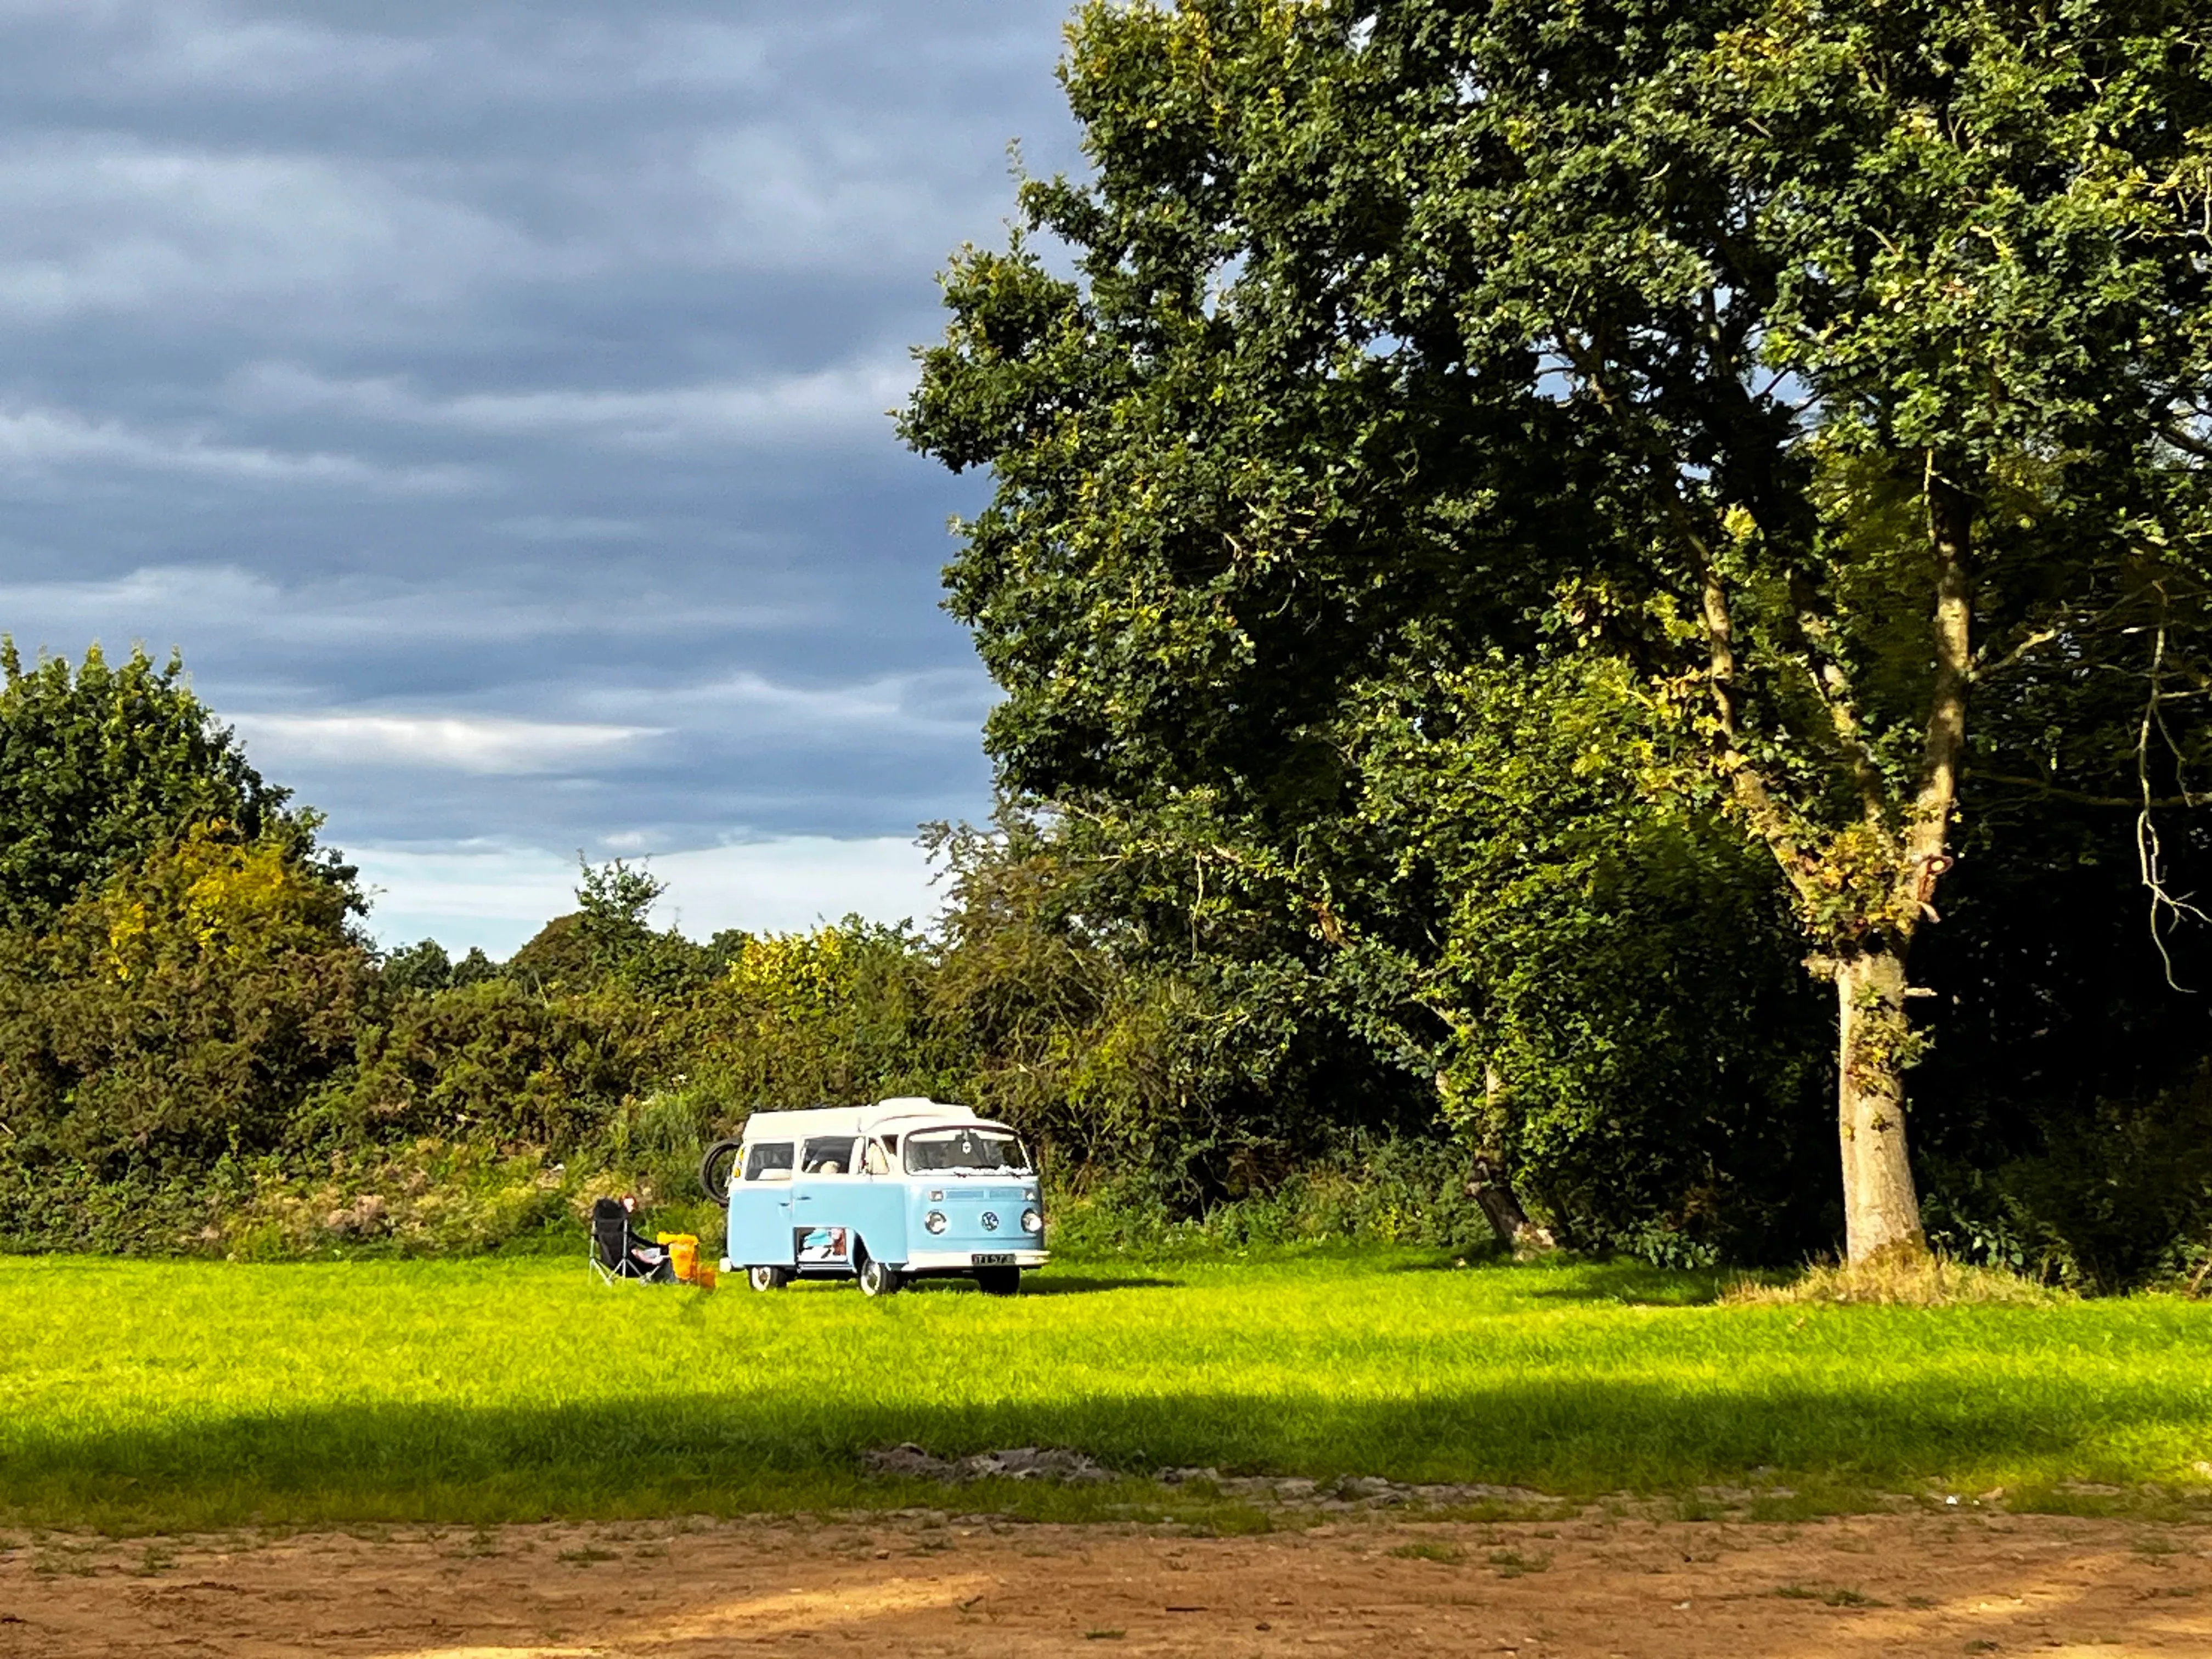 a light blue campervan pitched up on a campsite